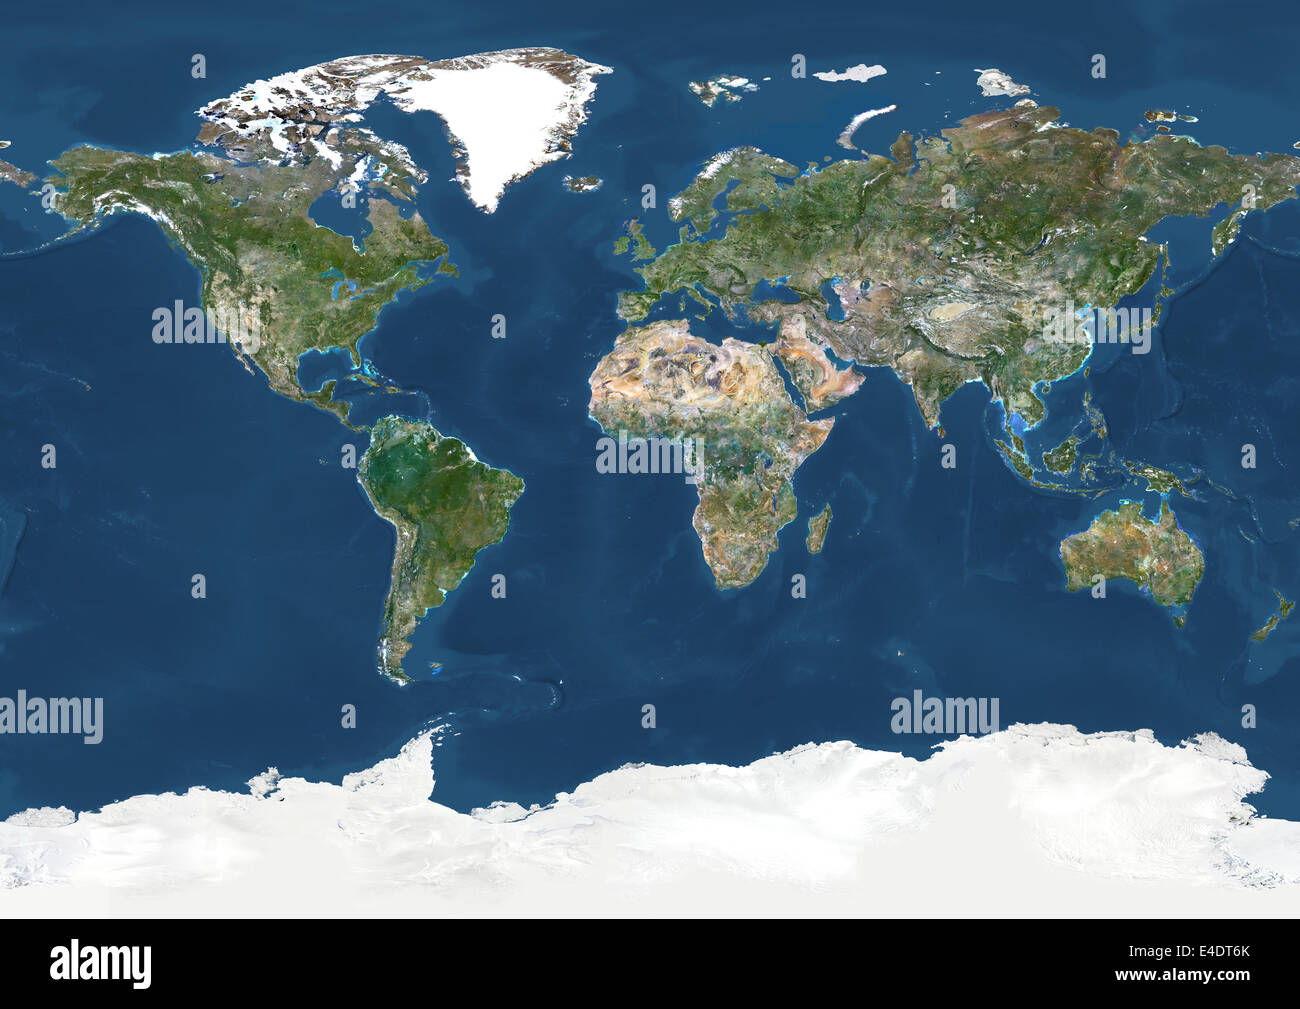 World In Geographic Projection, True Colour Satellite Image. True colour cloudless satellite image of the whole Earth, shown in Stock Photo